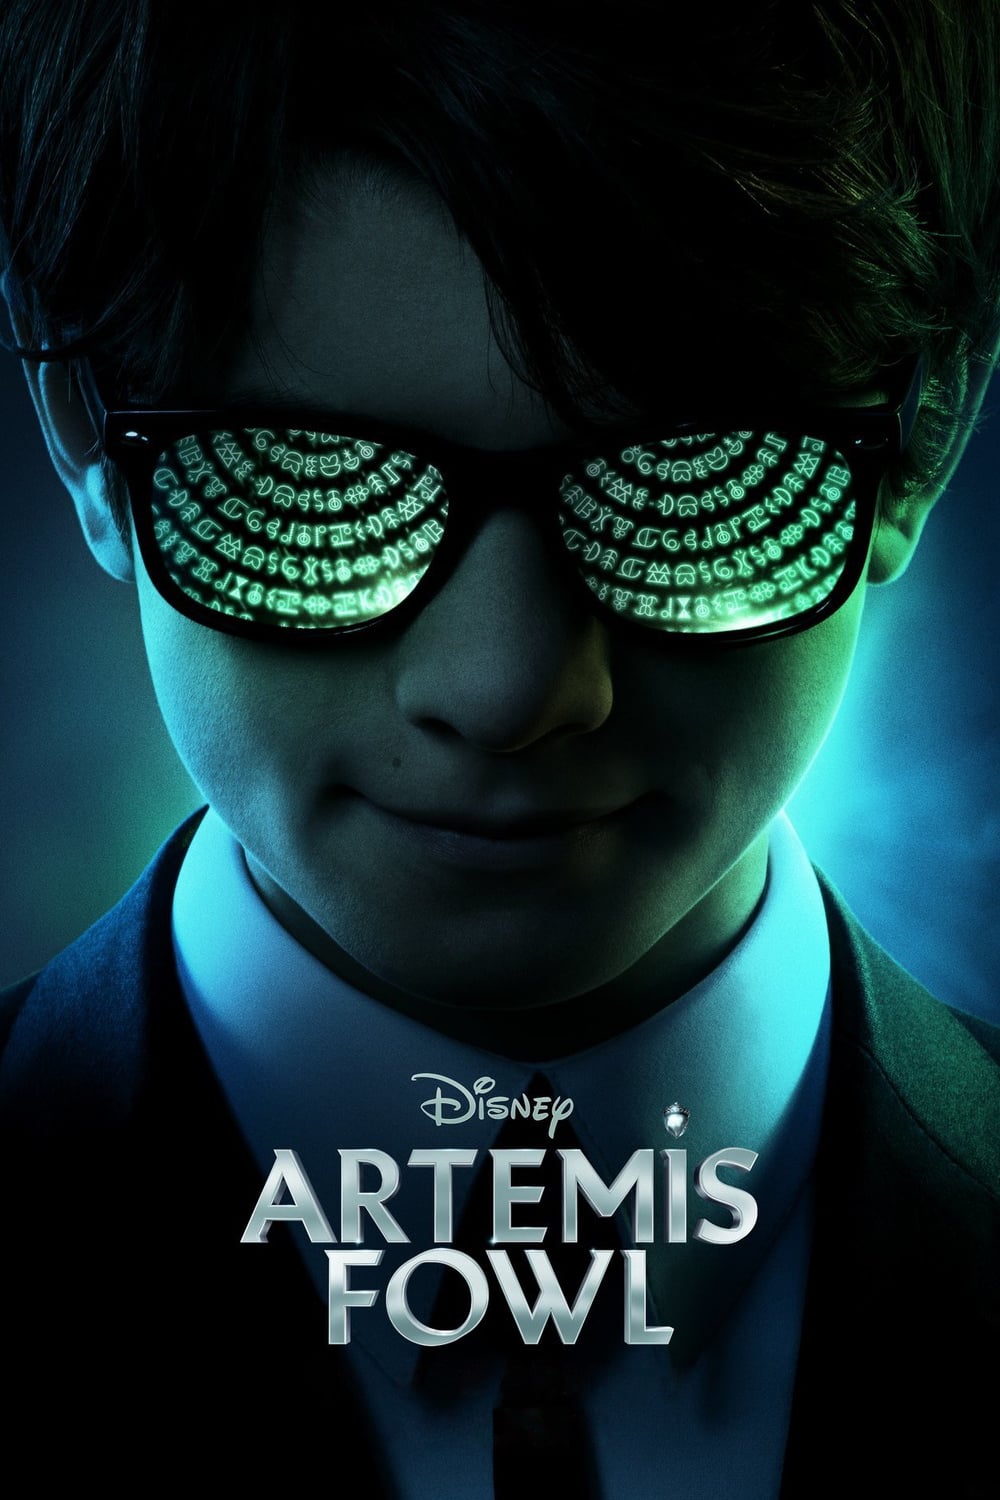 Poster for the movie "Artemis Fowl"